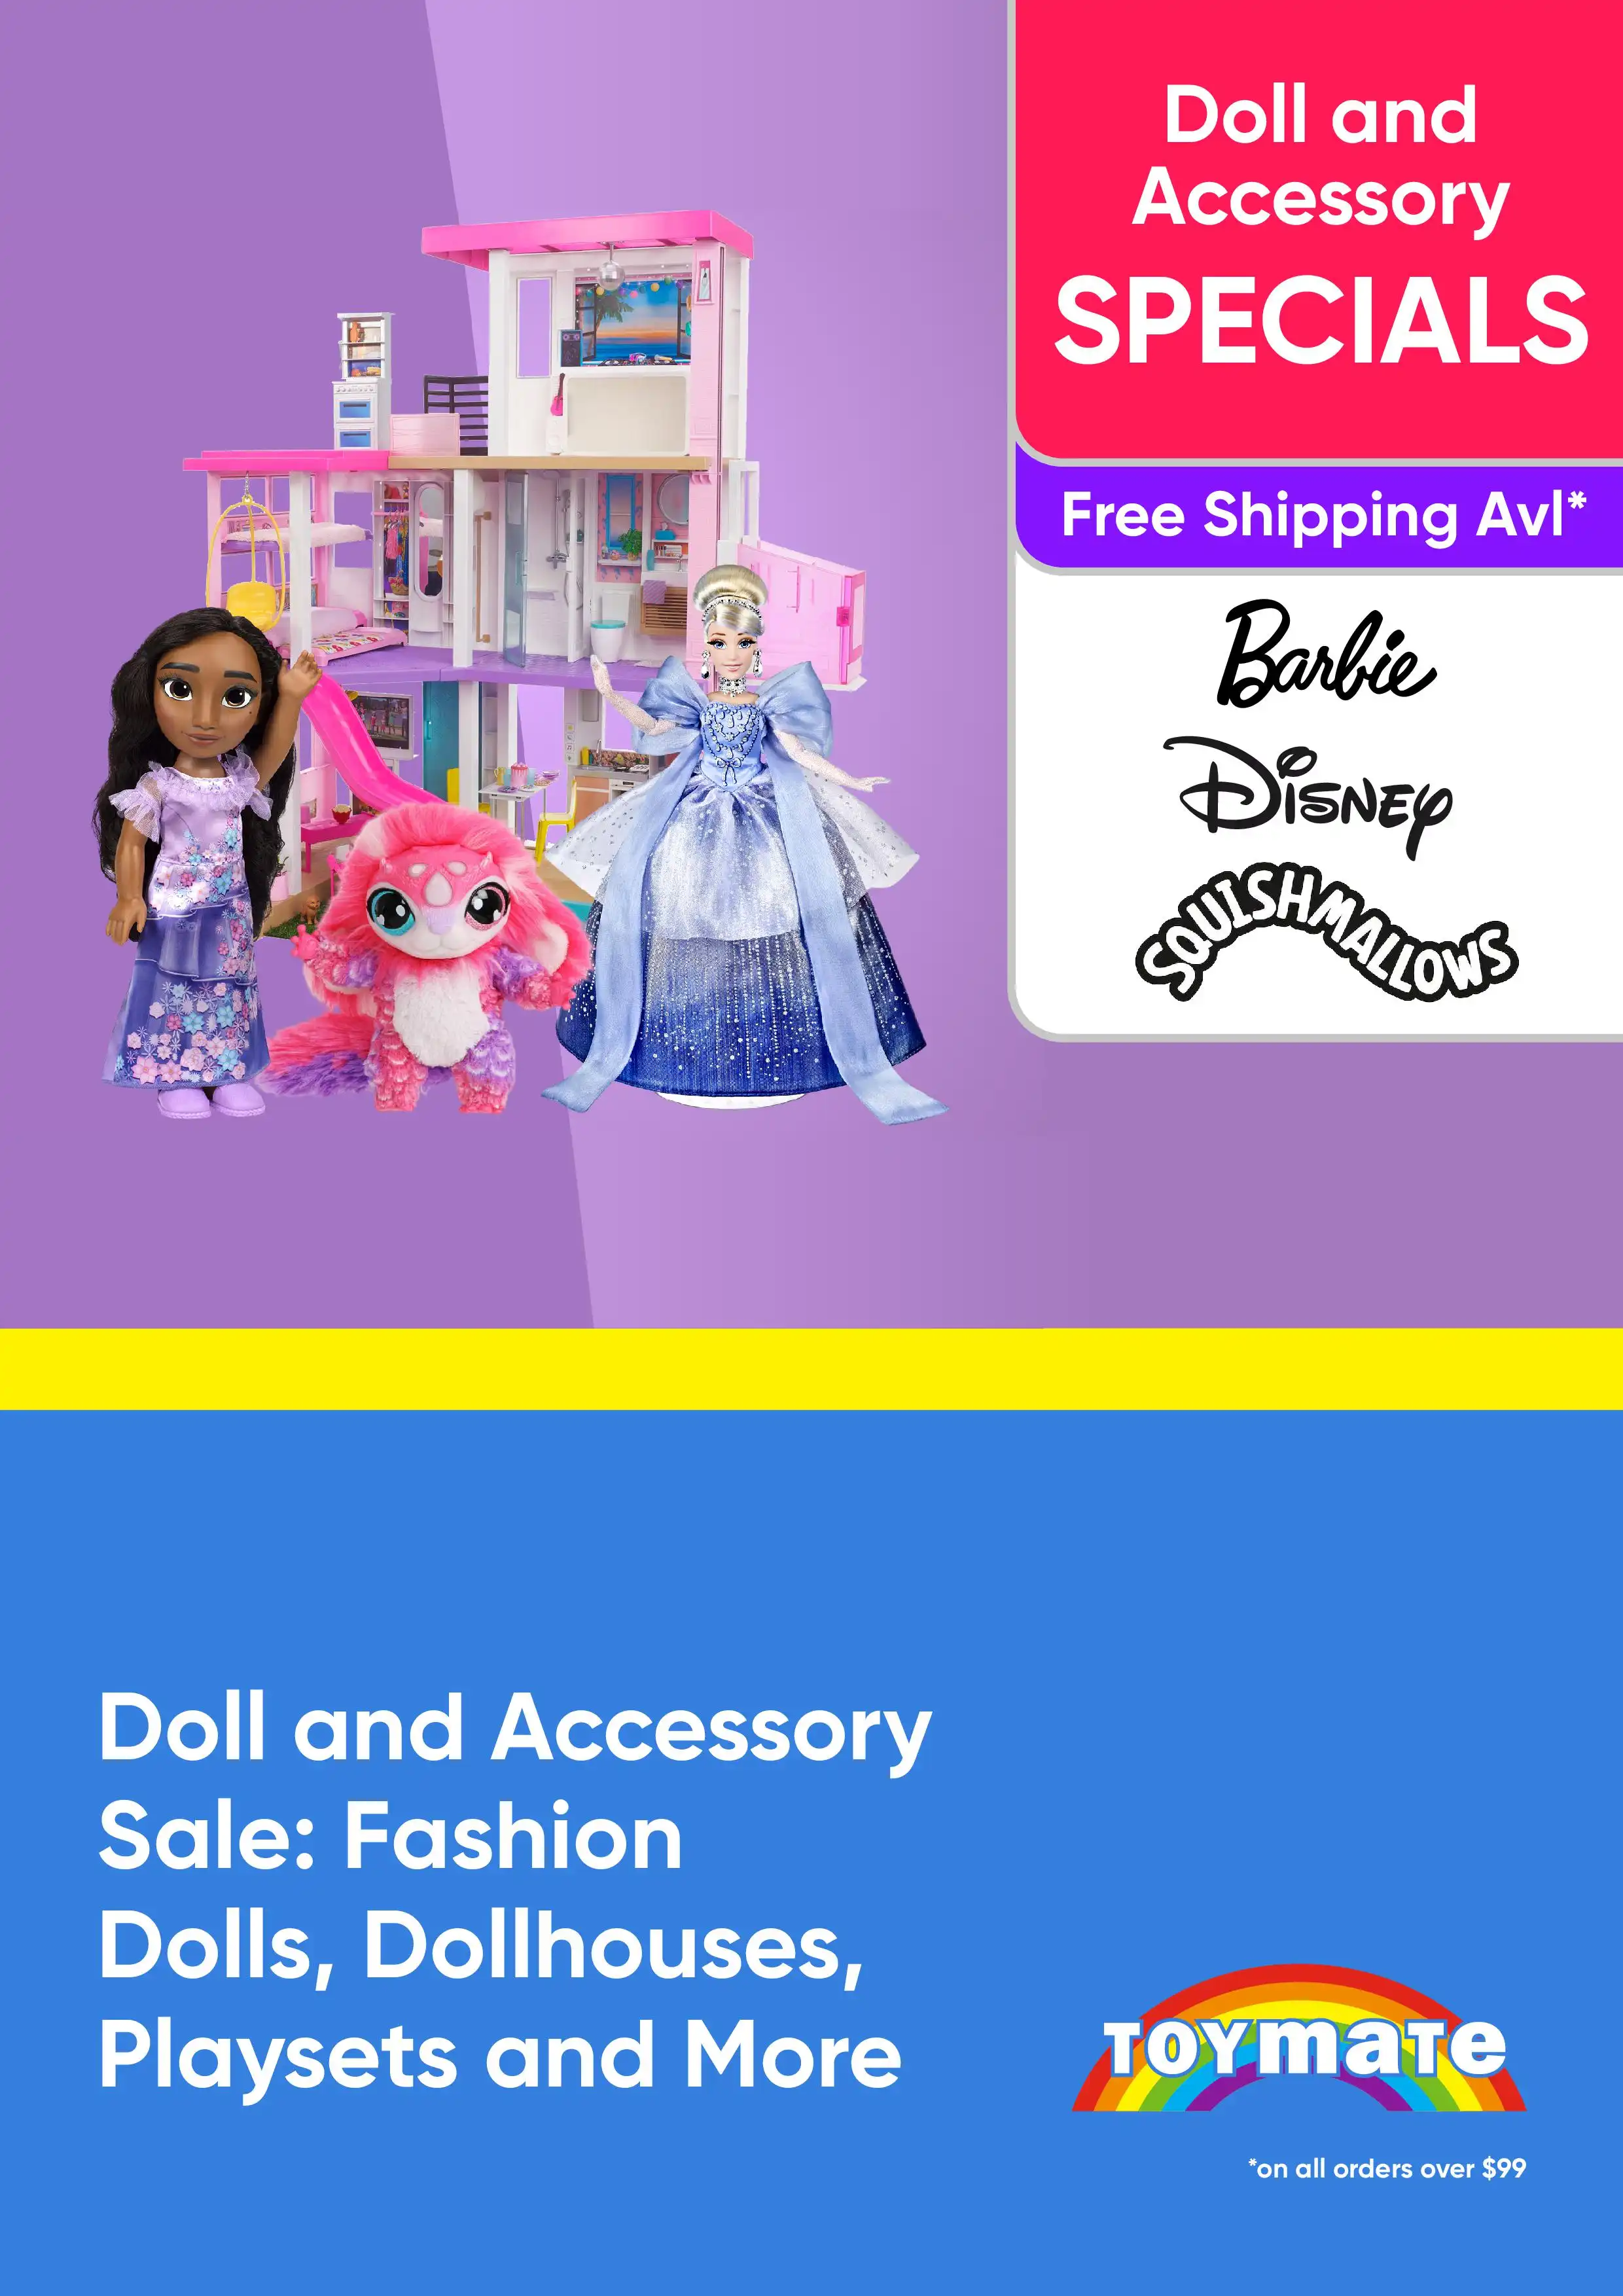 Doll and Accessory Sale - Fashion Dolls, Dollhouses, Playsets and More - Barbie, Disney, Squishmallows